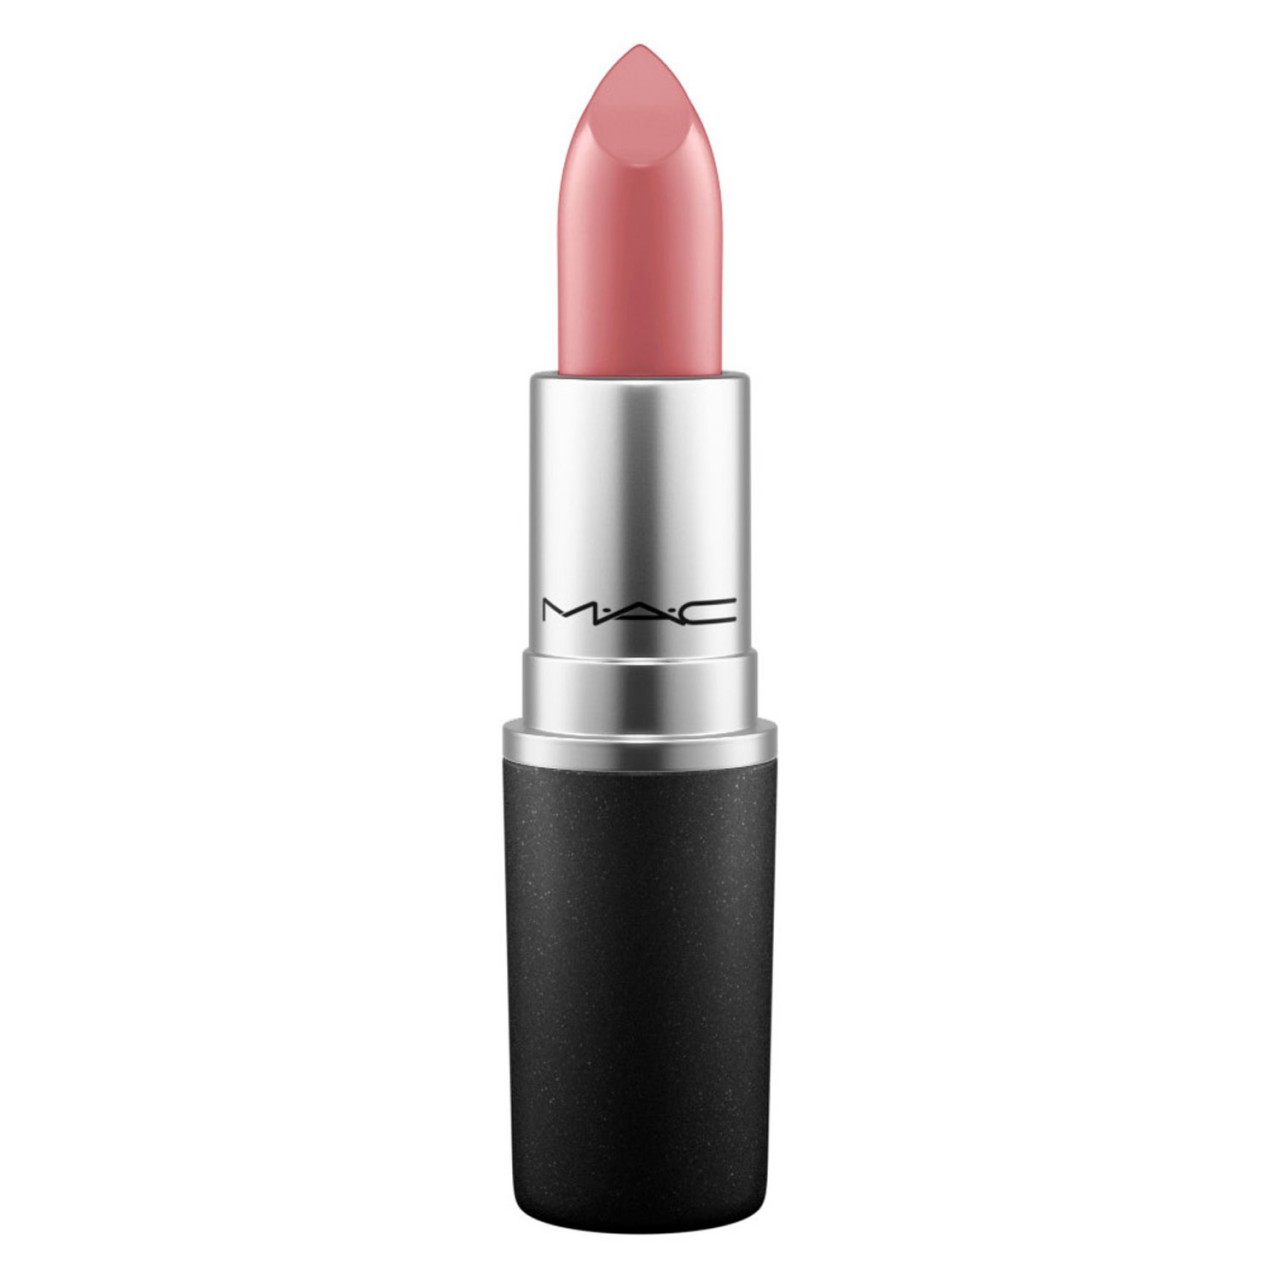 Amplified Creme Lipstick - Cosmo